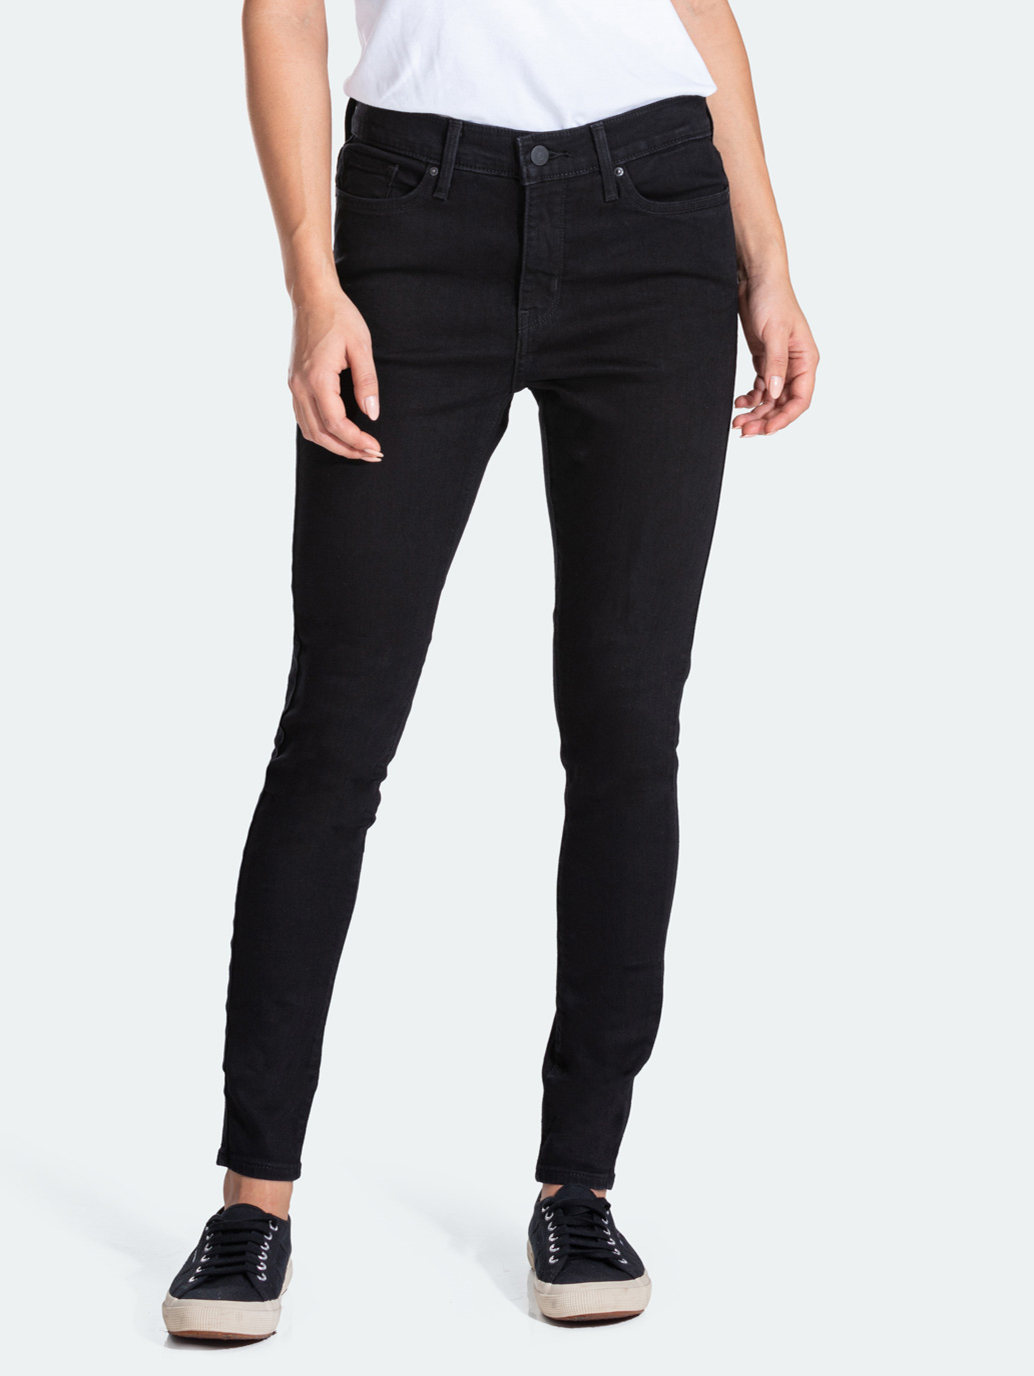 Buy Levi's® Women's 310 Shaping Super Skinny Jeans | Levi's® Official  Online Store MY